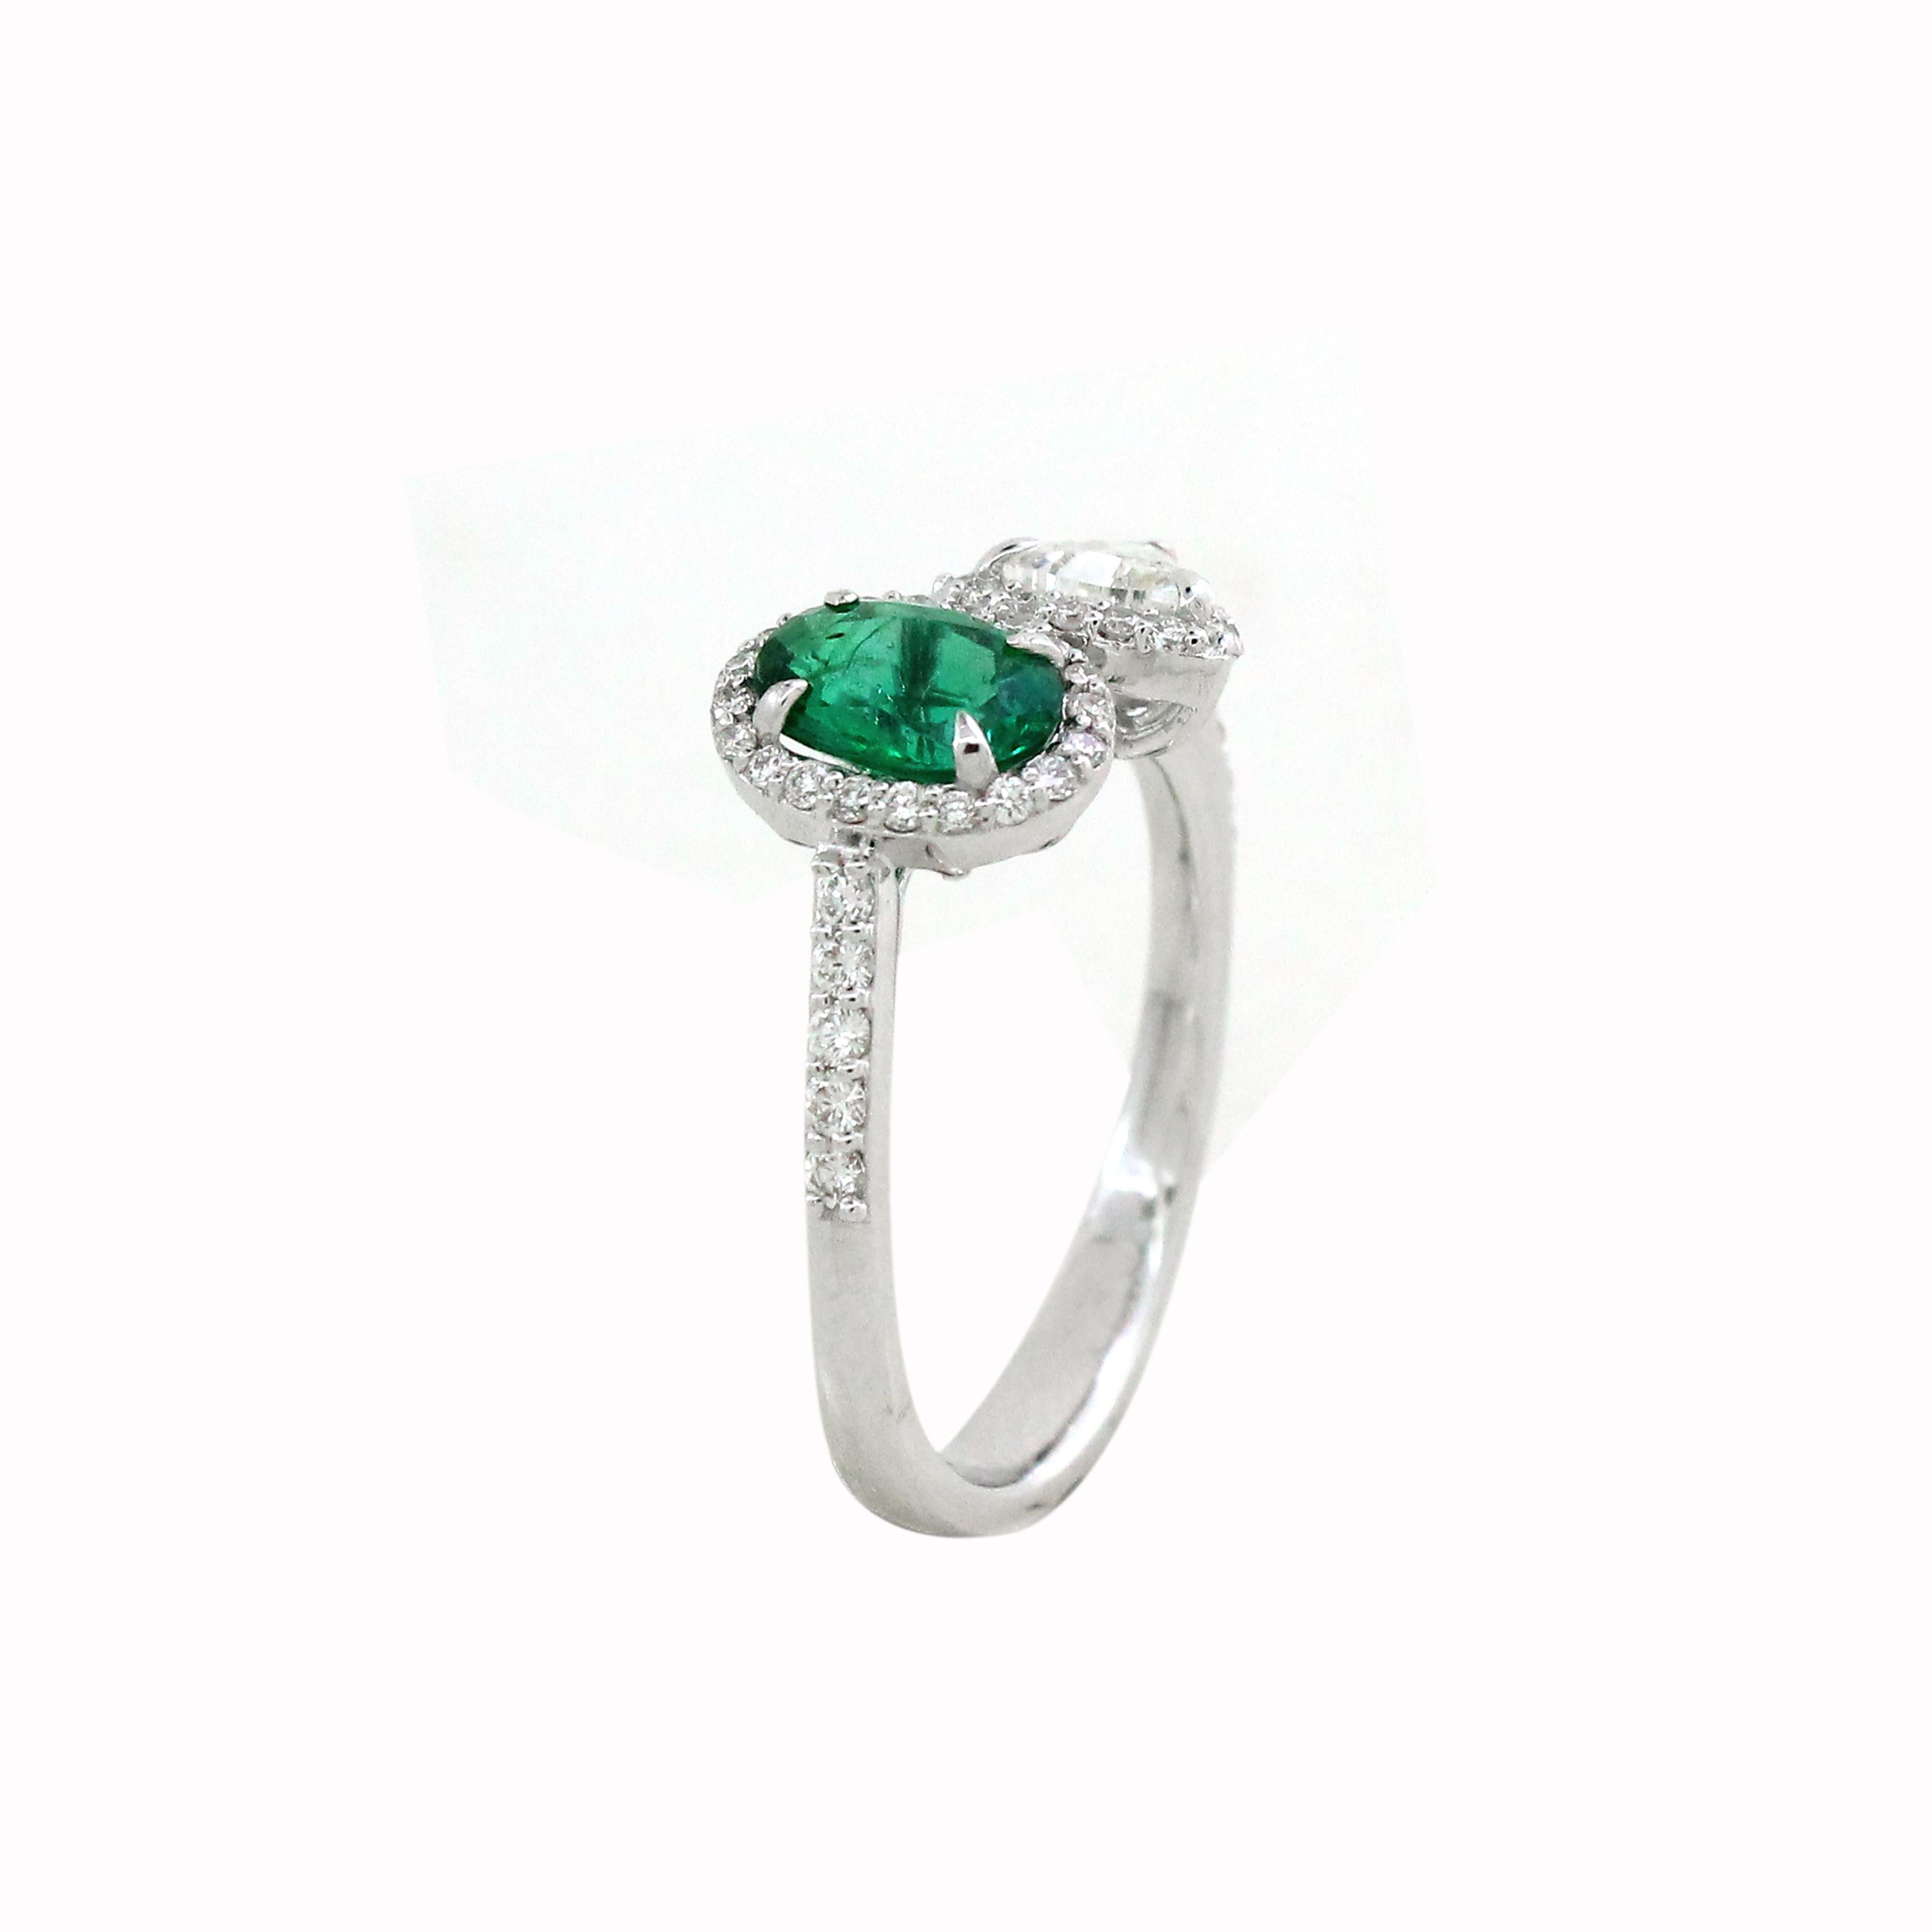 Oval Cut Oval Zambian Emerald 0.72 ct Toi-et-moi Ring For Sale